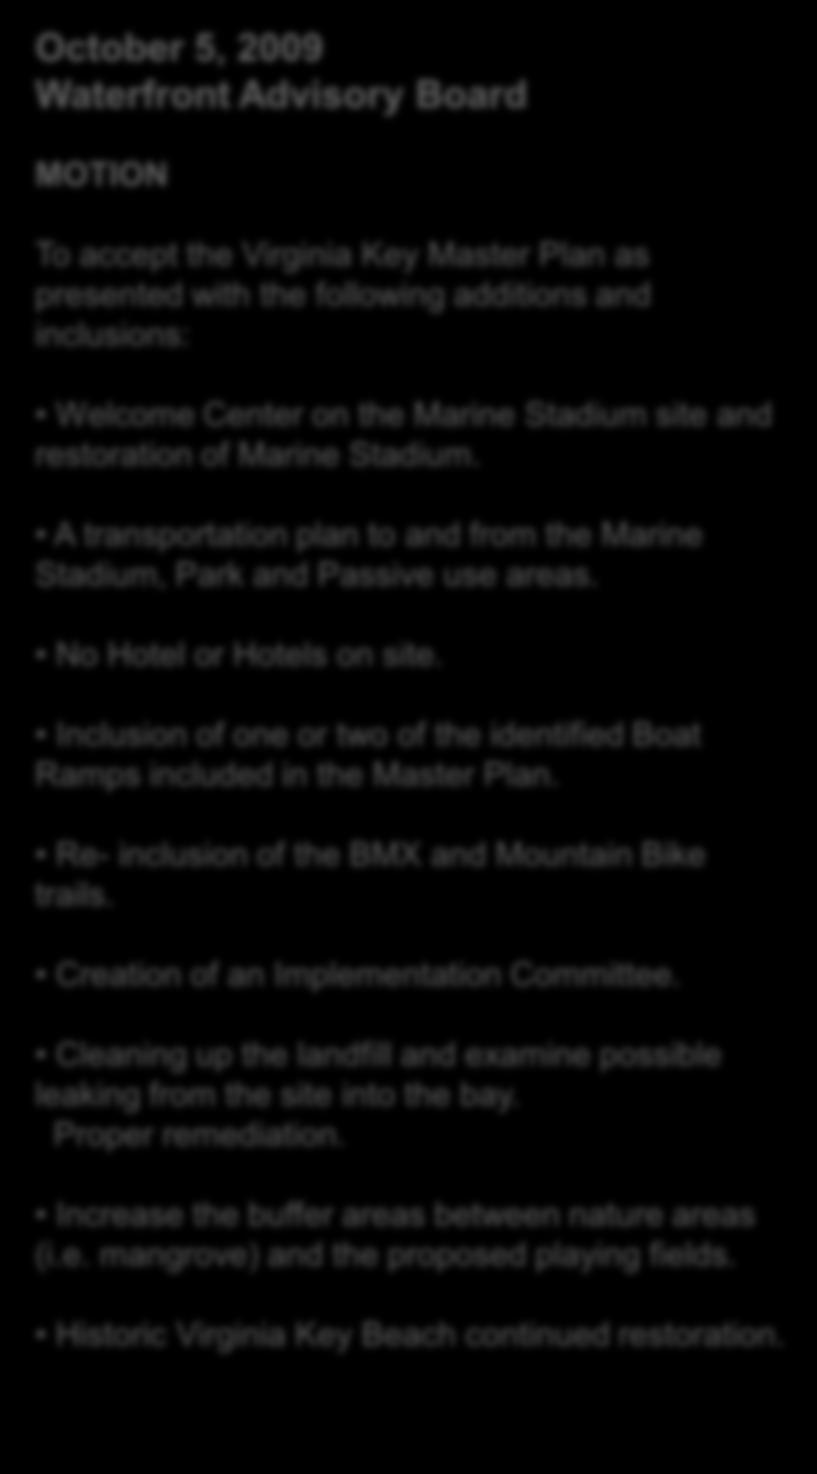 October 5, 2009 Waterfront Advisory Board MOTION To accept the Virginia Key Master Plan as presented with the following additions and inclusions: Welcome Center on the Marine Stadium site and